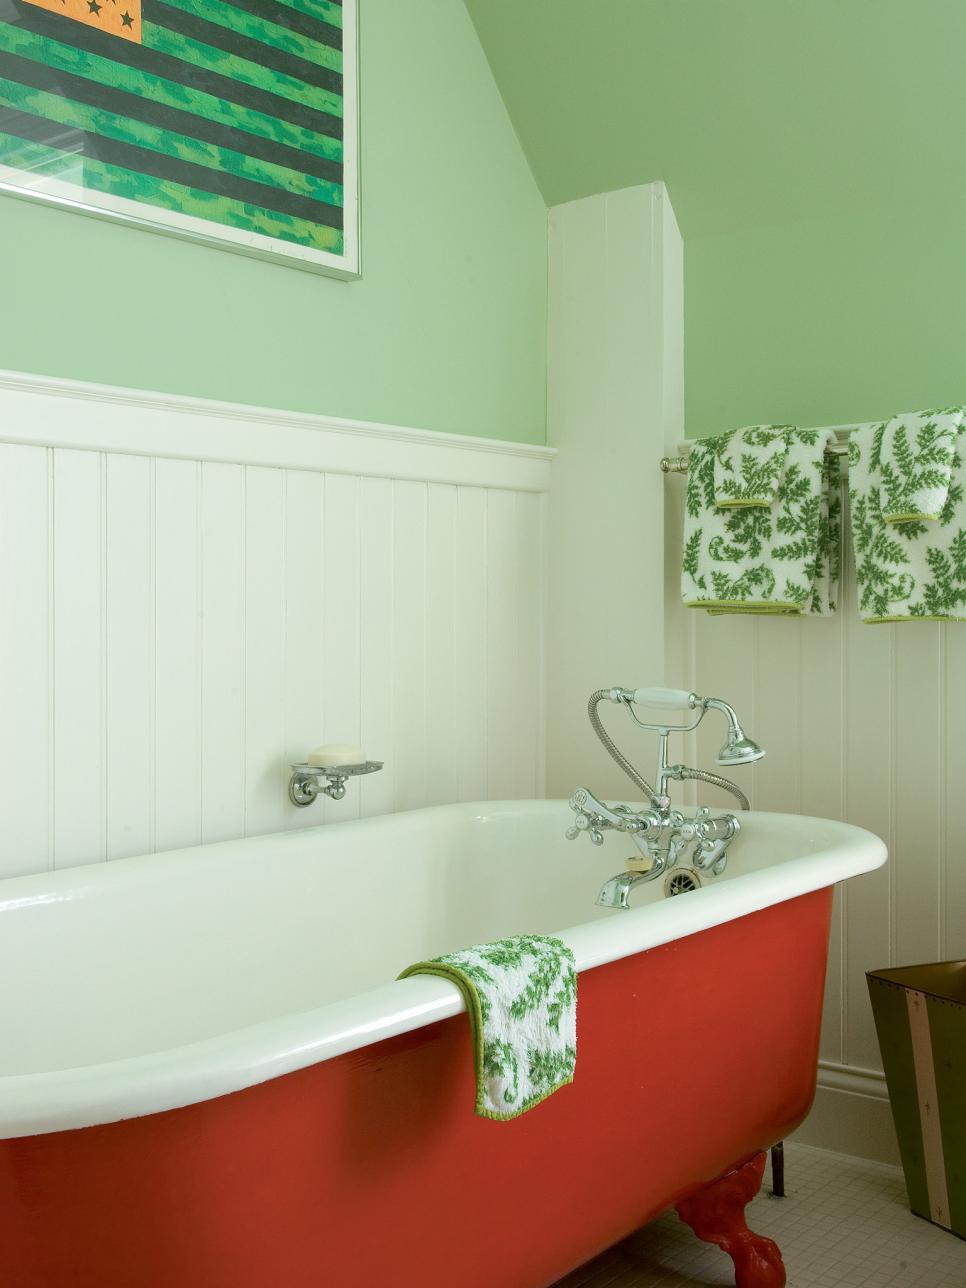 Red Claw-Foot Tub in Green Bathroom With White Beadboard